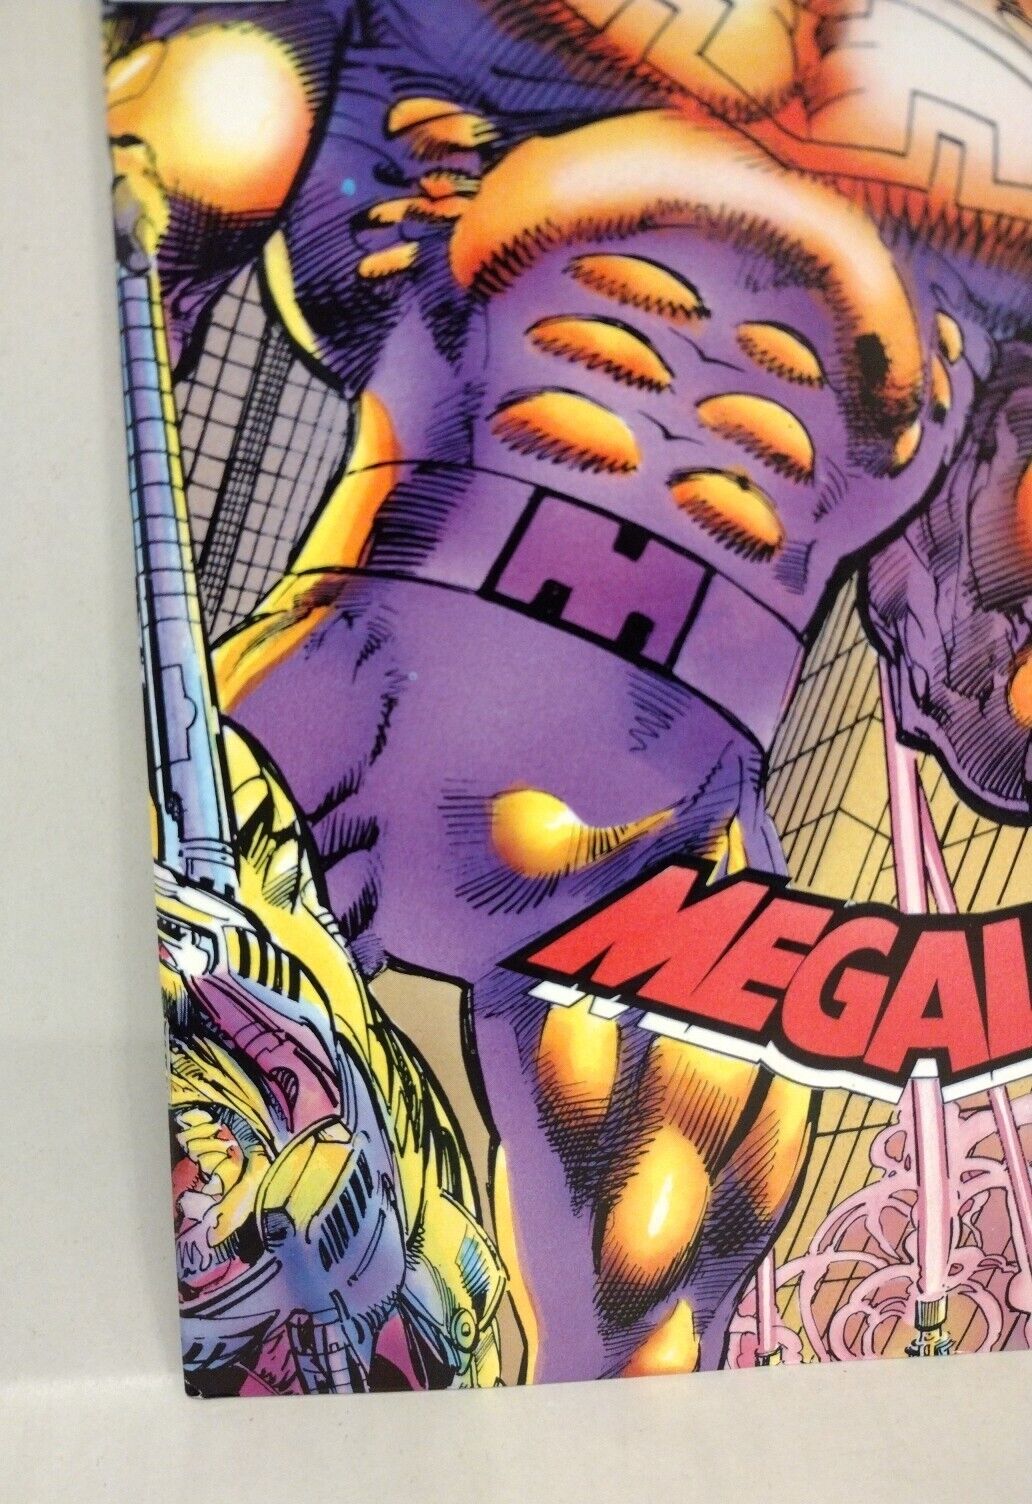 Megalith Vol 2 #2 (1993) Continuity Comic Deathwatch 2000 Pt 10 Neal Adams VF-NM